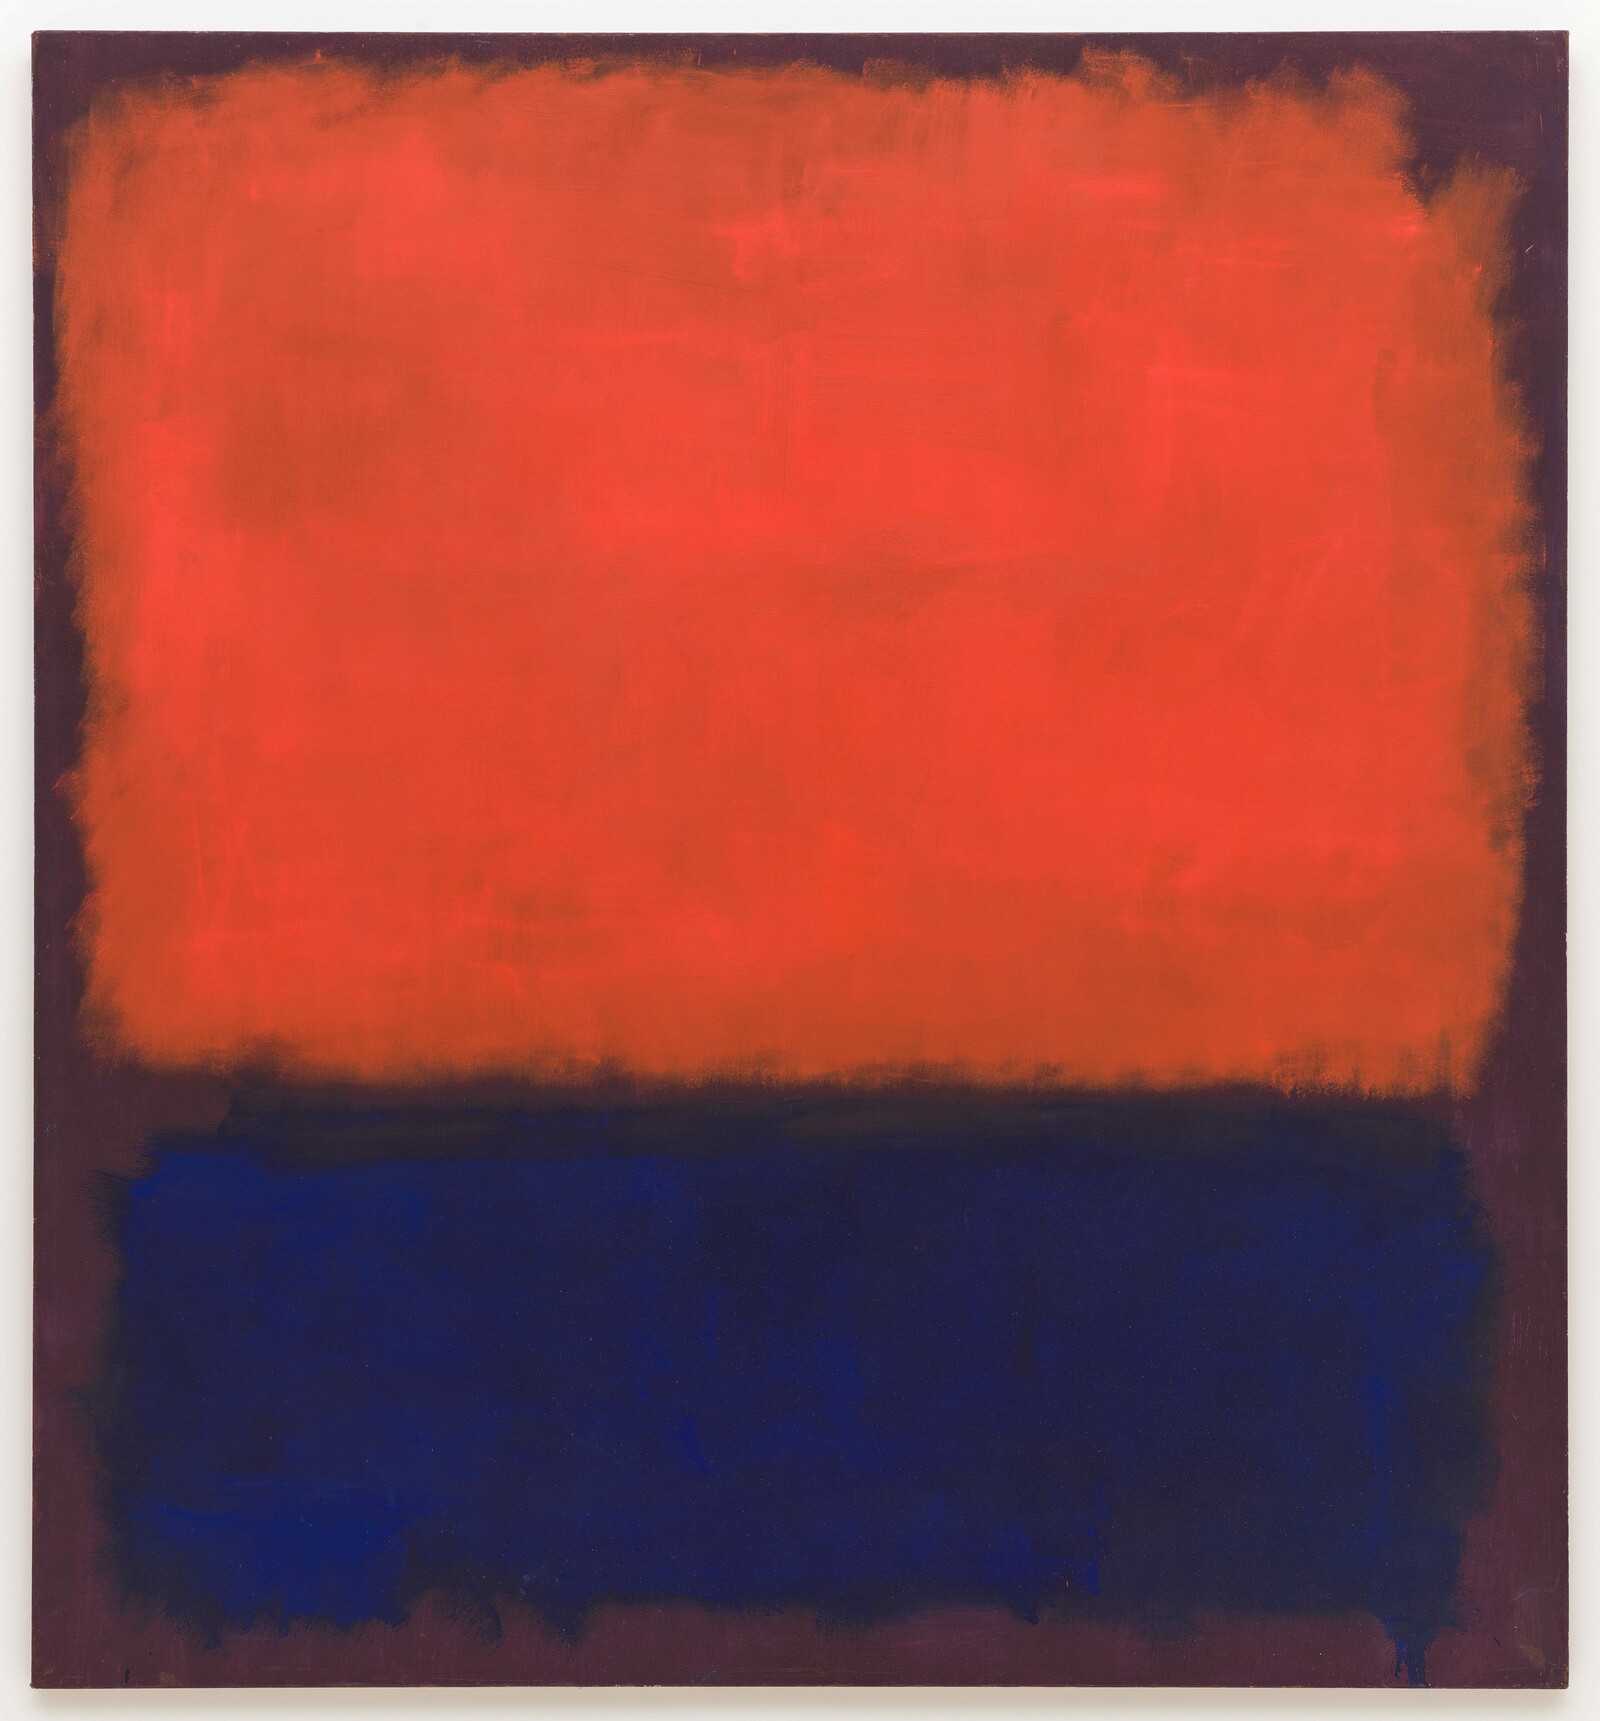 Mark Rothko exhibition and admission to the Fondation Louis Vuitton